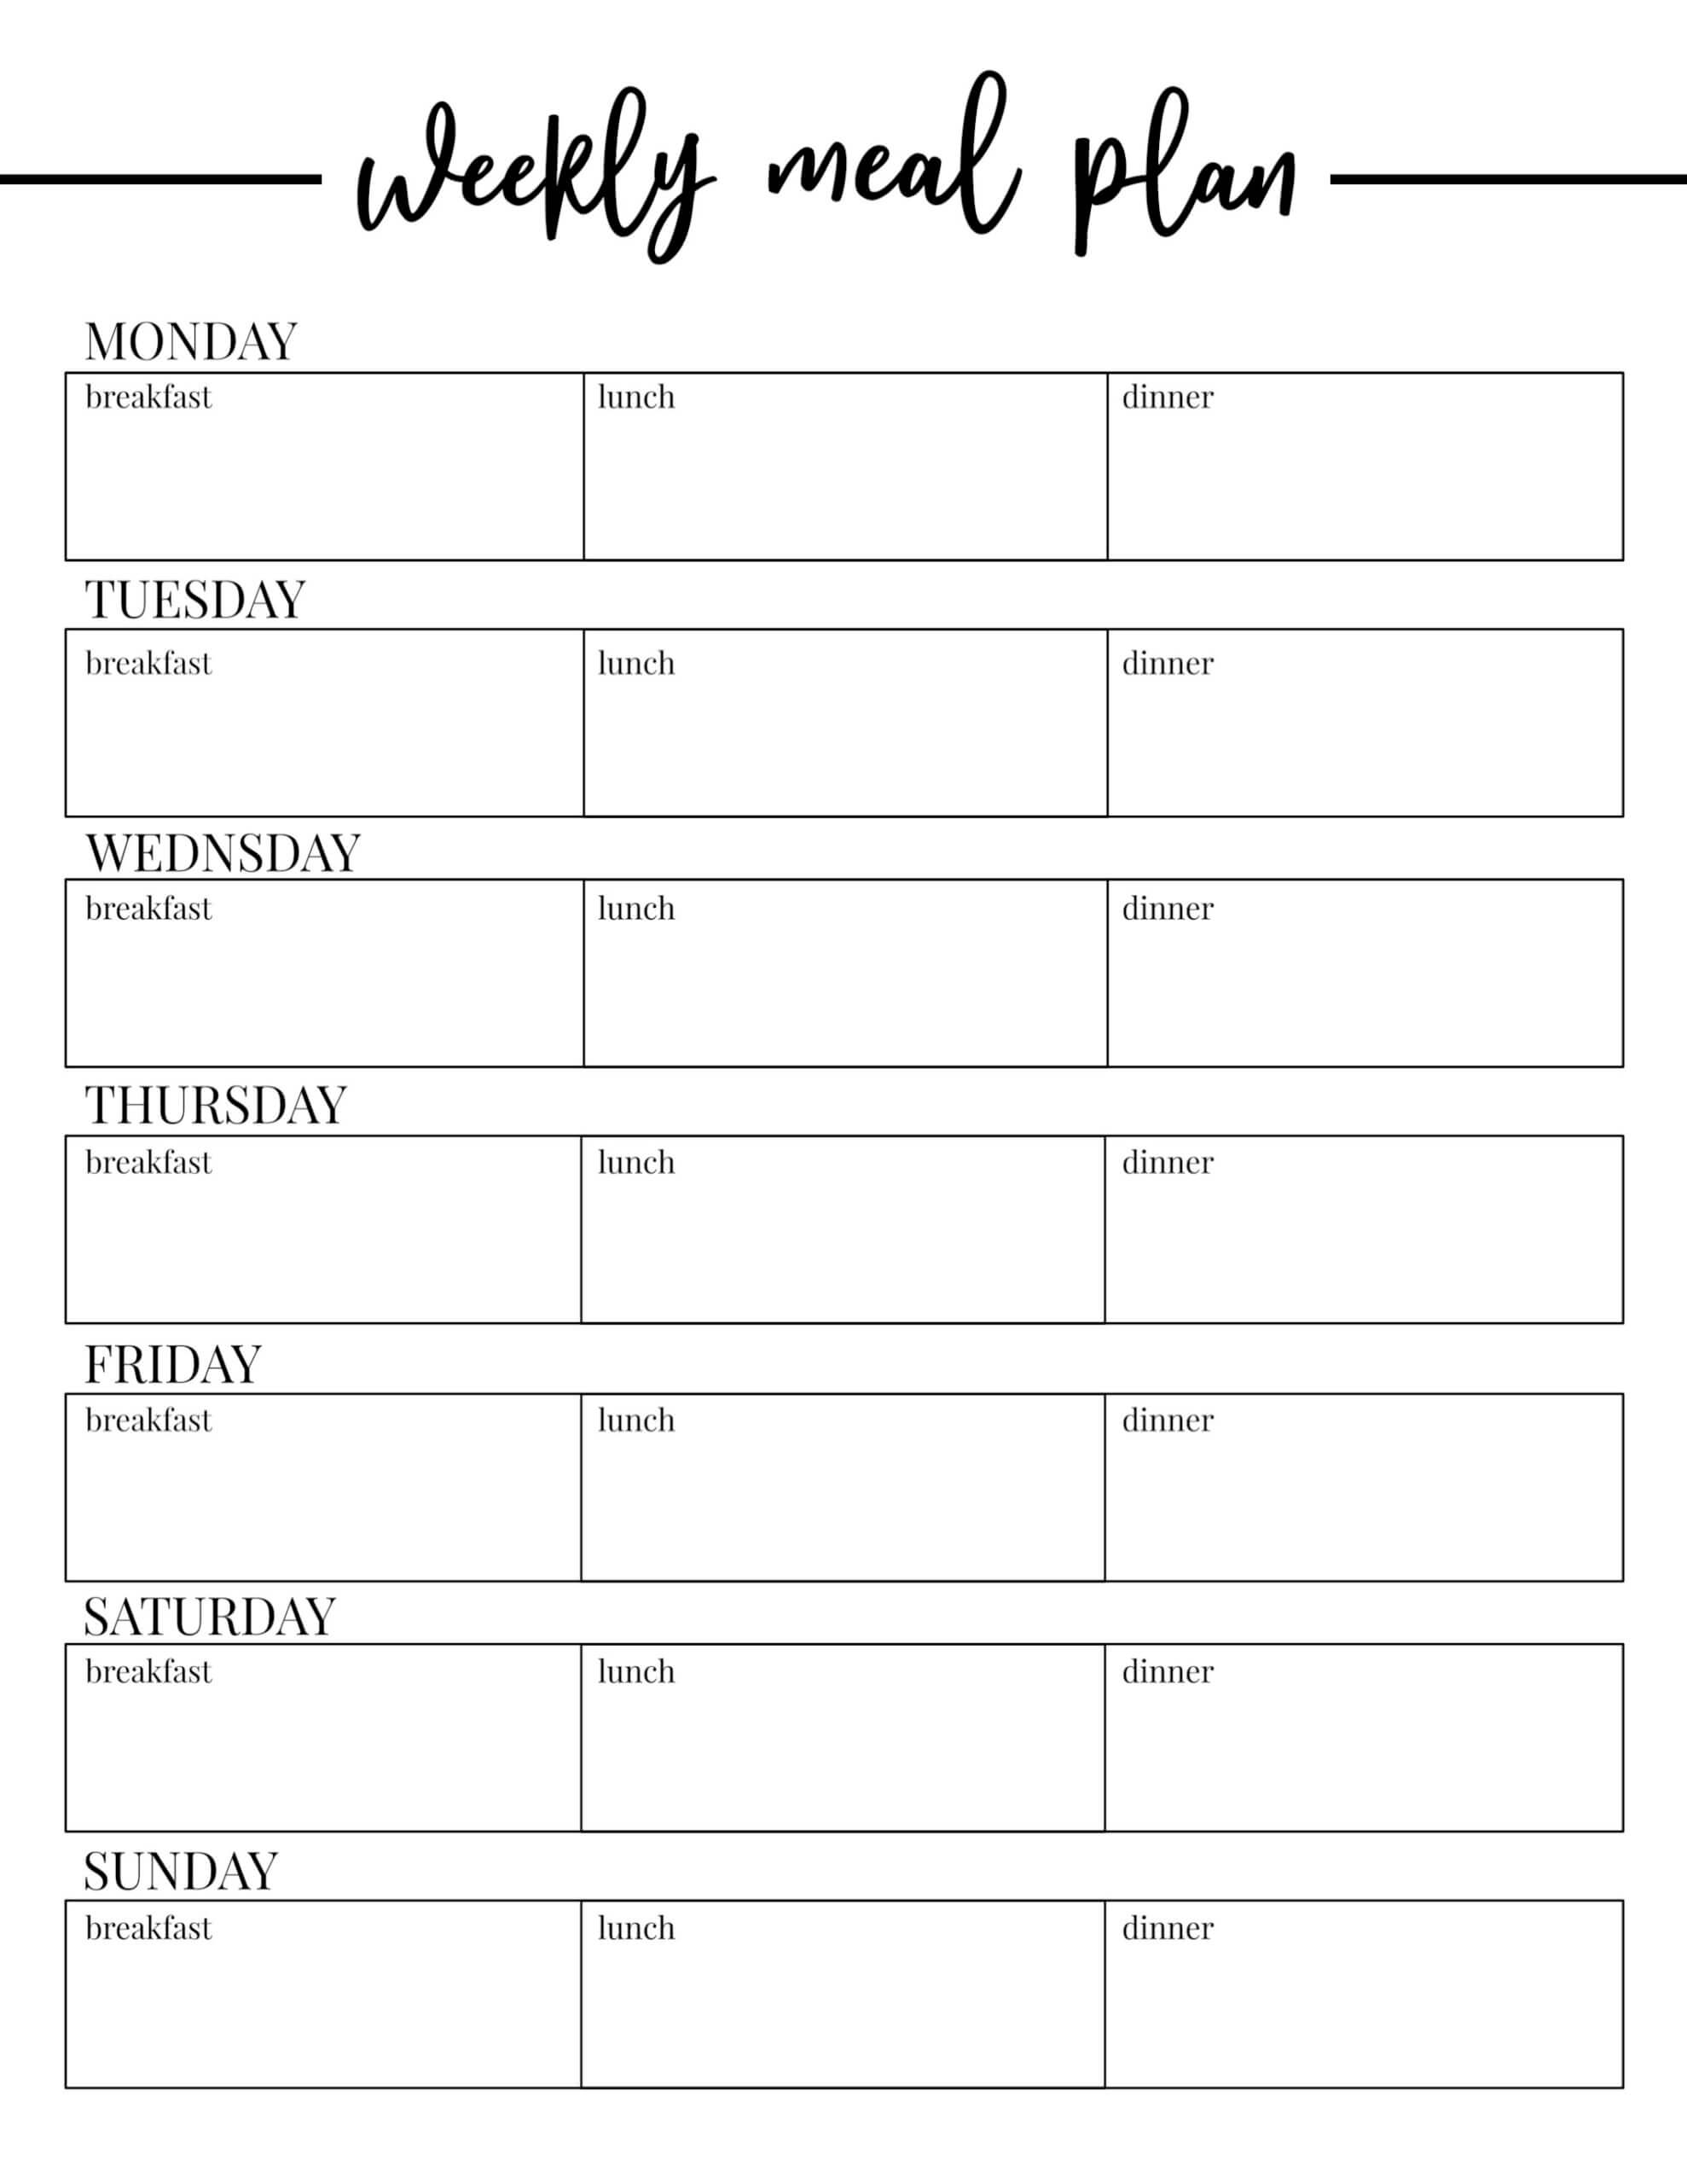 010-template-ideas-meal-plan-pdf-frightening-weekly-planning-with-blank